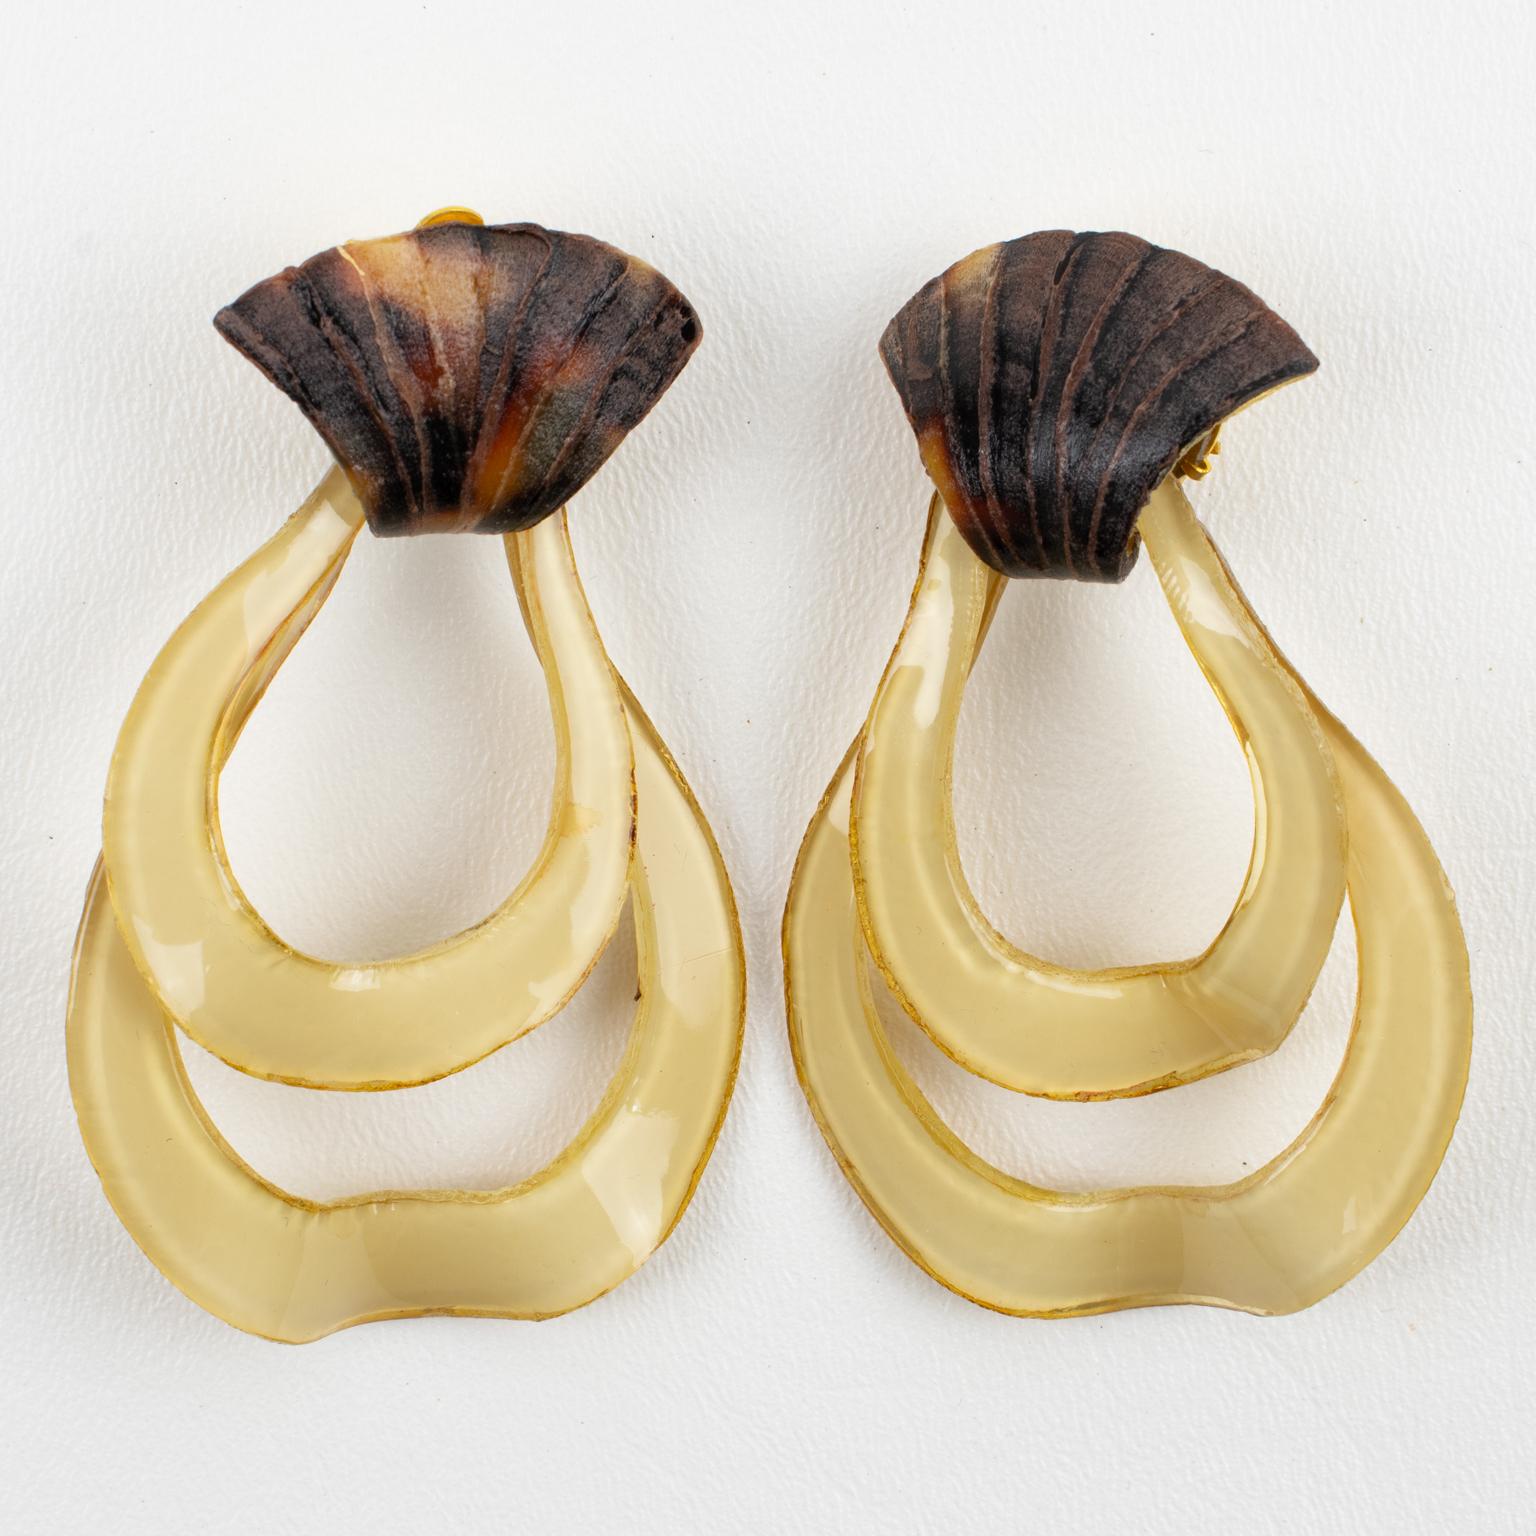 Modern Francoise Montague by Cilea Resin Clip Earrings Dangle Tan and Tortoise Drops For Sale